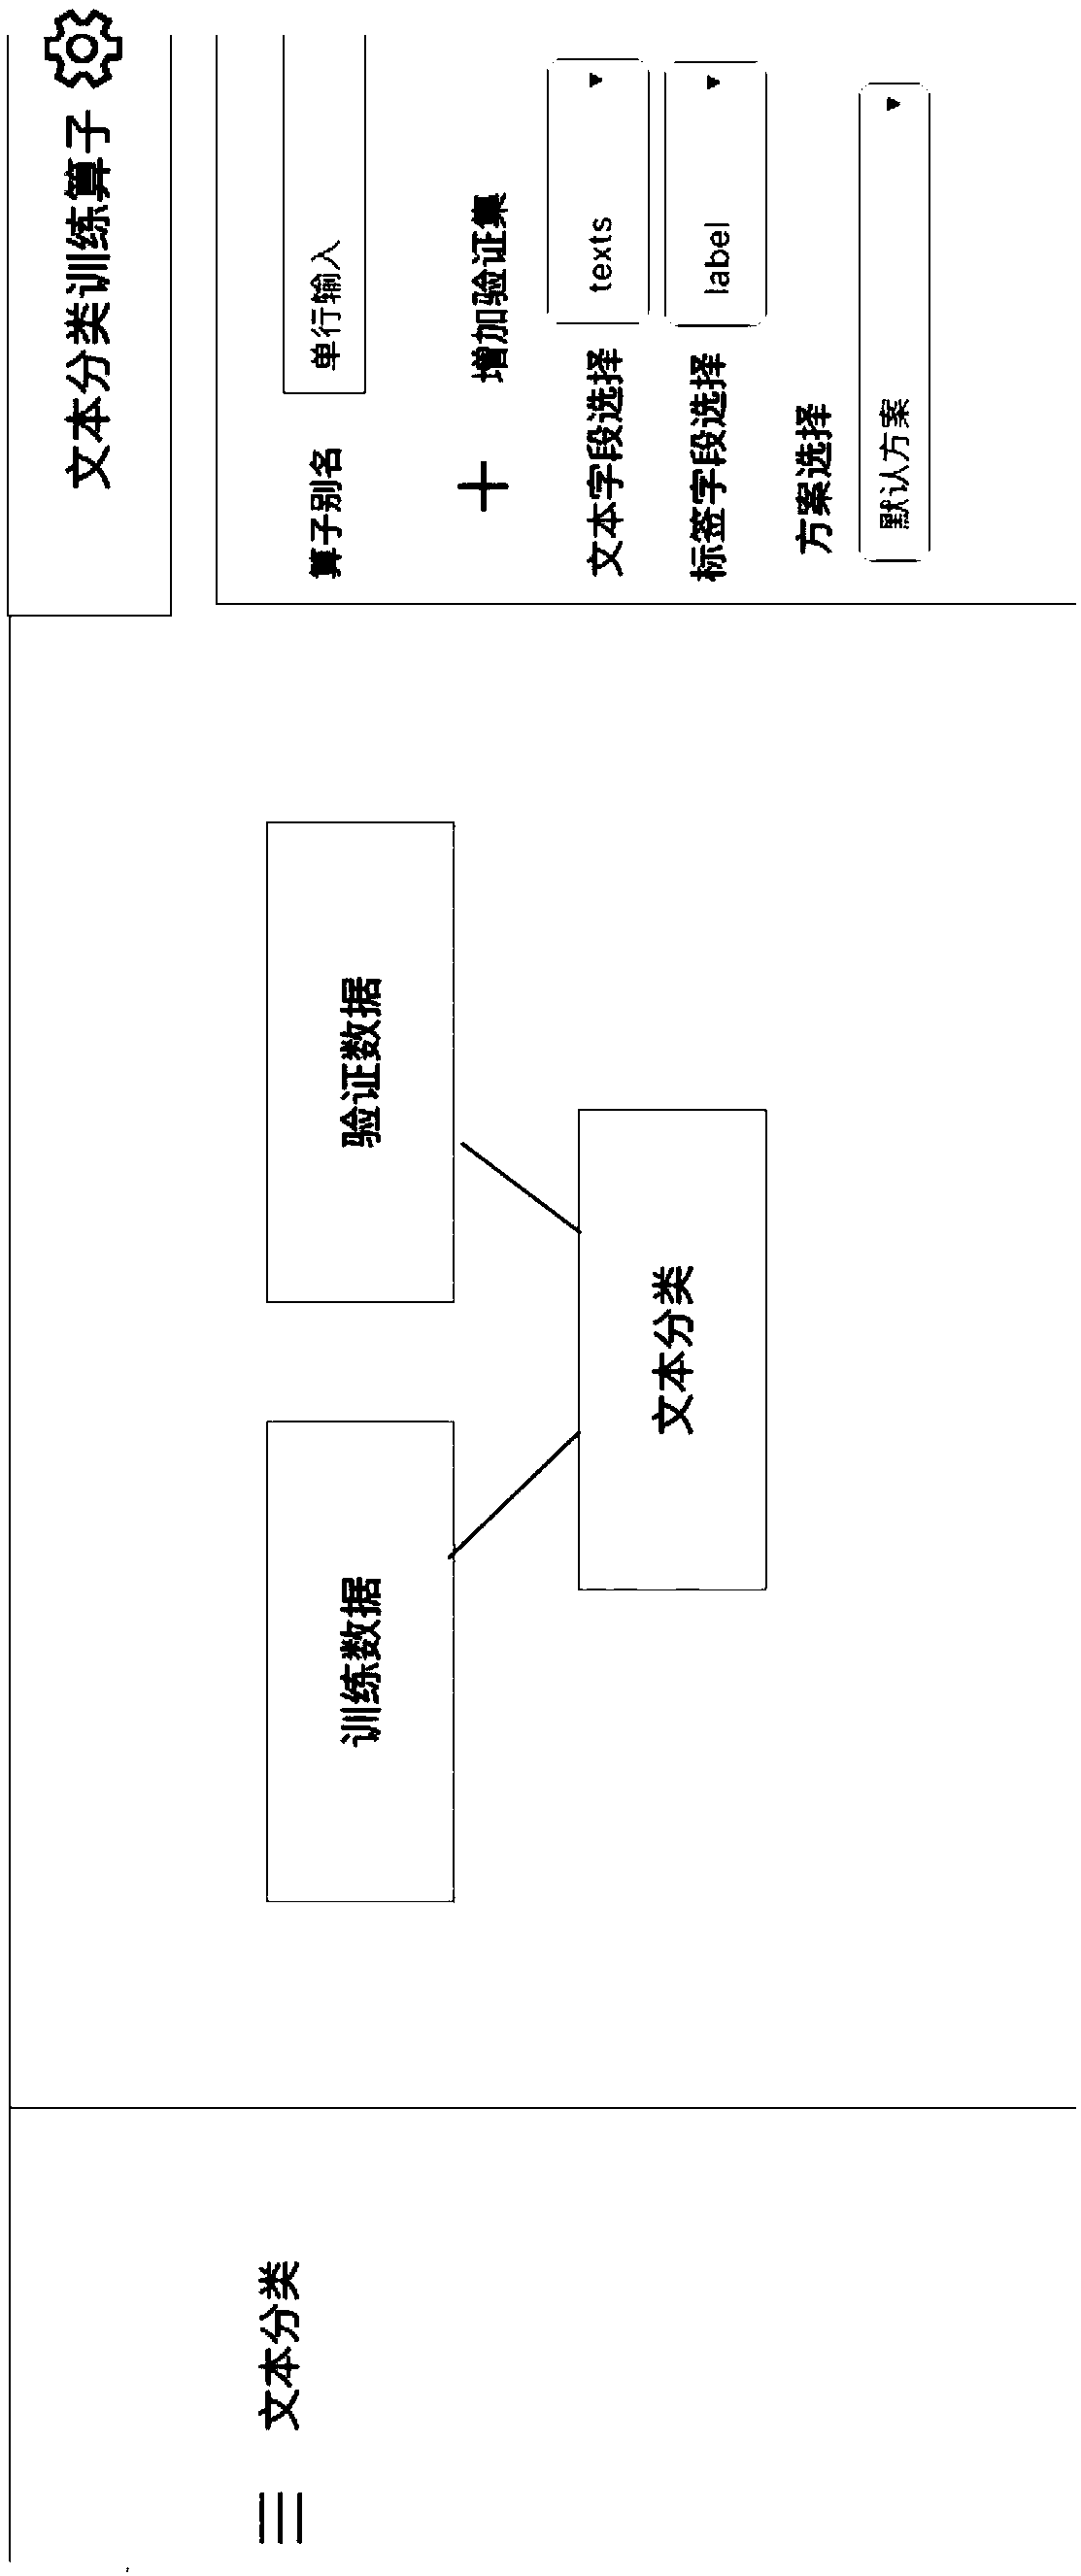 Method and system for performing machine learning process for text classification